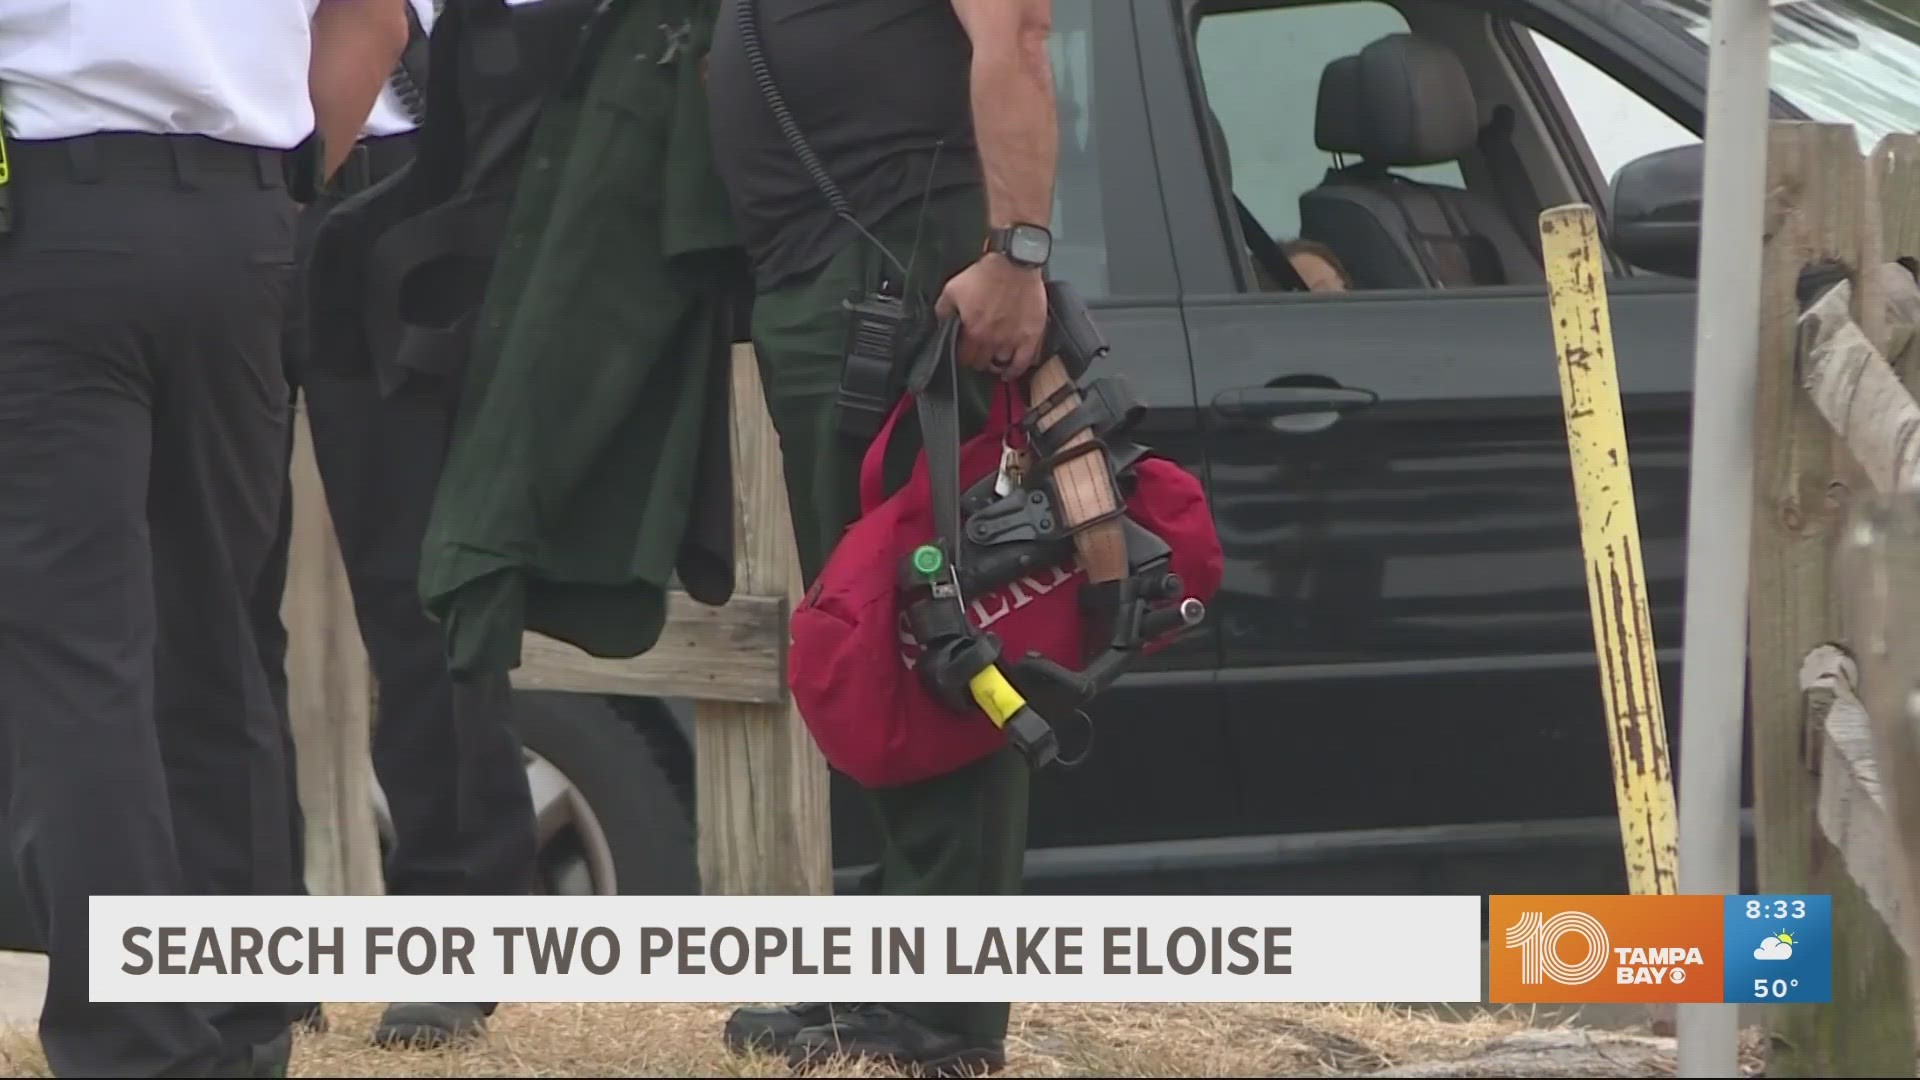 Lake Eloise is near the Legoland theme park in Winter Haven. Since law enforcement officials have been working to find the two missing people.